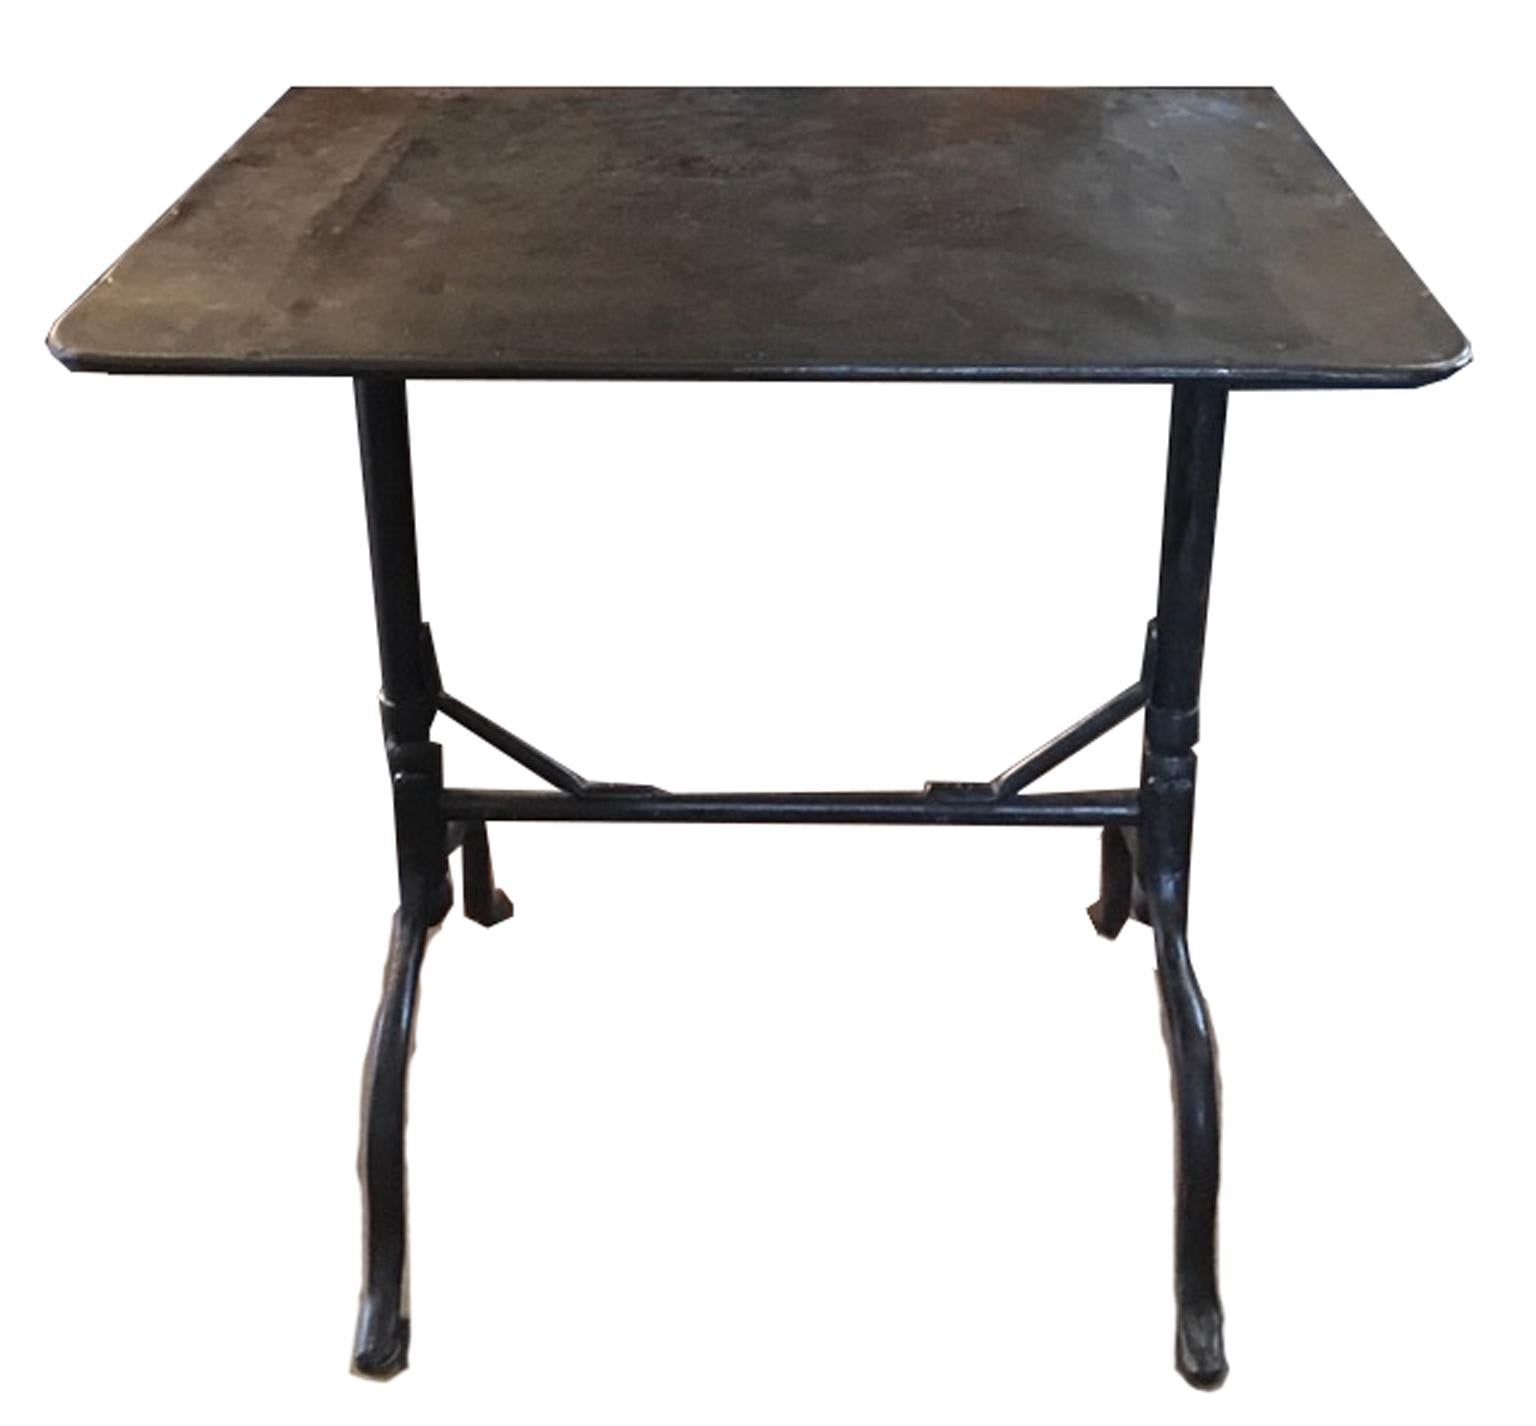 1930 France Wrought Iron Bistrot Table with Folding Top Outdoor Indoor Use